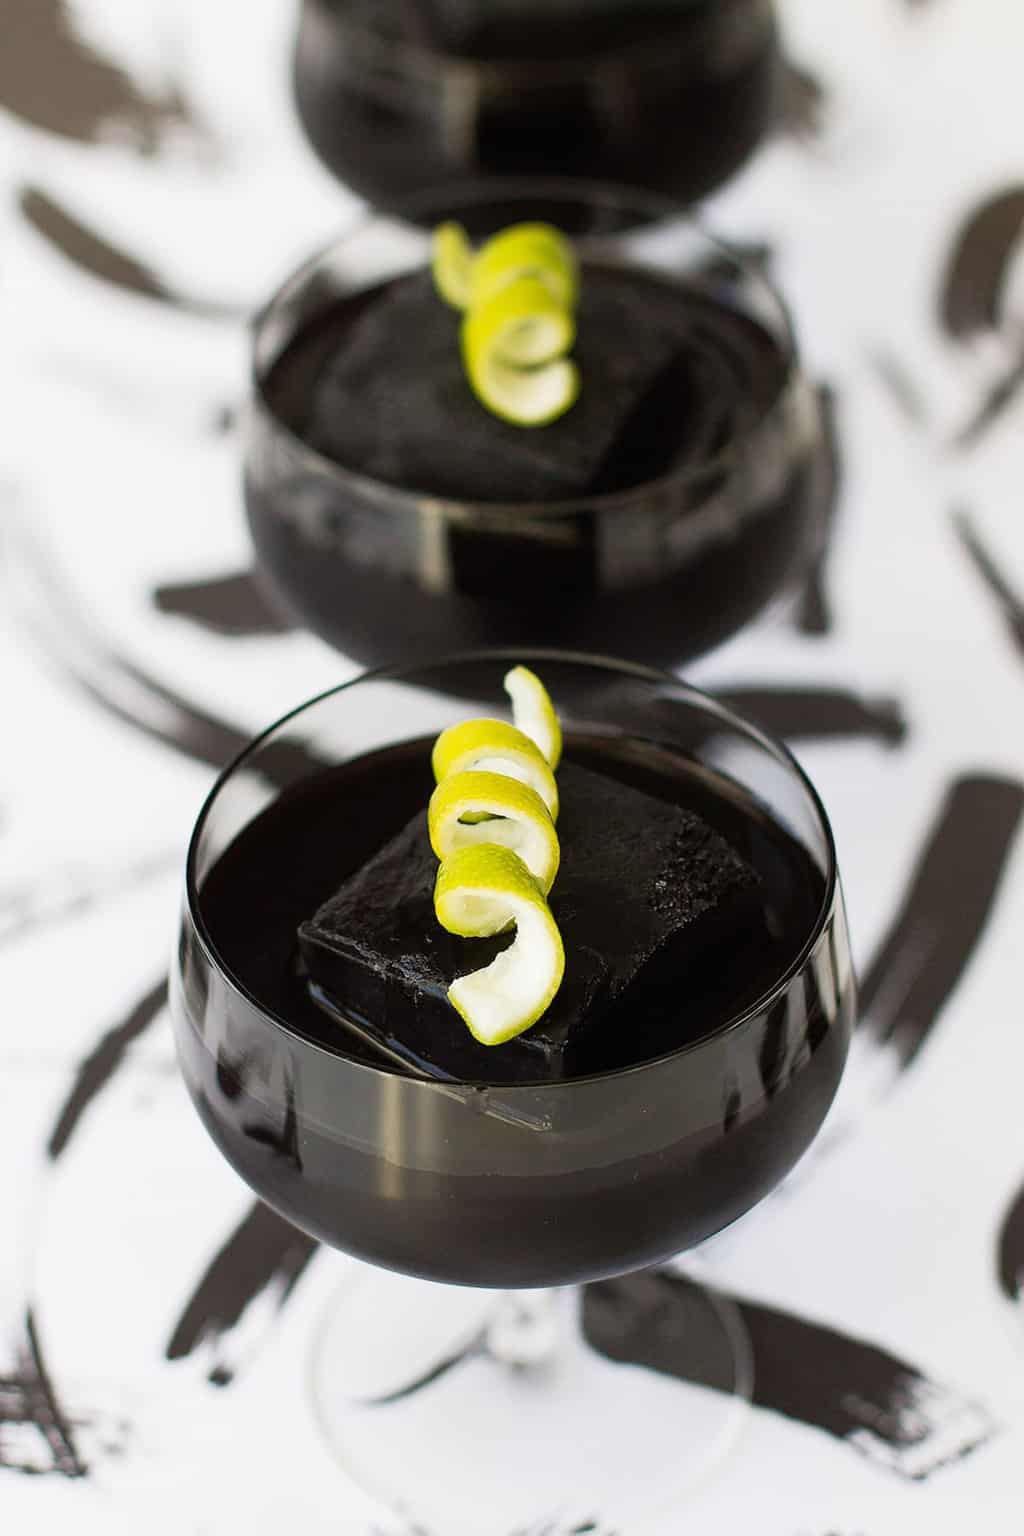 a perfectly halloween cocktail - Detoxing Activated Charcoal Cocktail Recipe by top Houston Lifestyle Blogger Ashley Rose of Sugar and Cloth #recipe #cocktail #halloween #detox #charcoal 